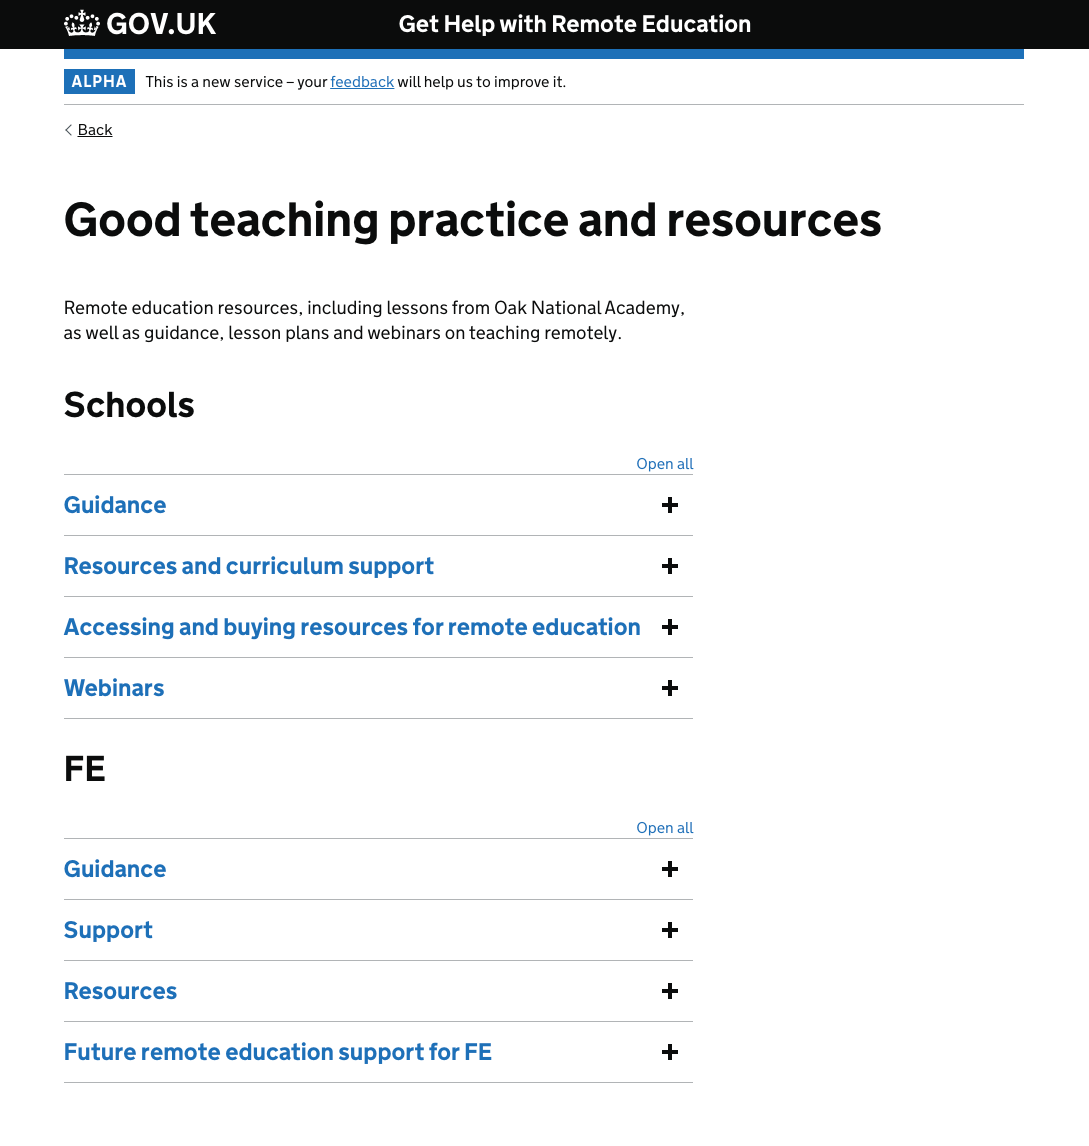 Screenshot of content page with two sets of accordion panels for Schools and for FE